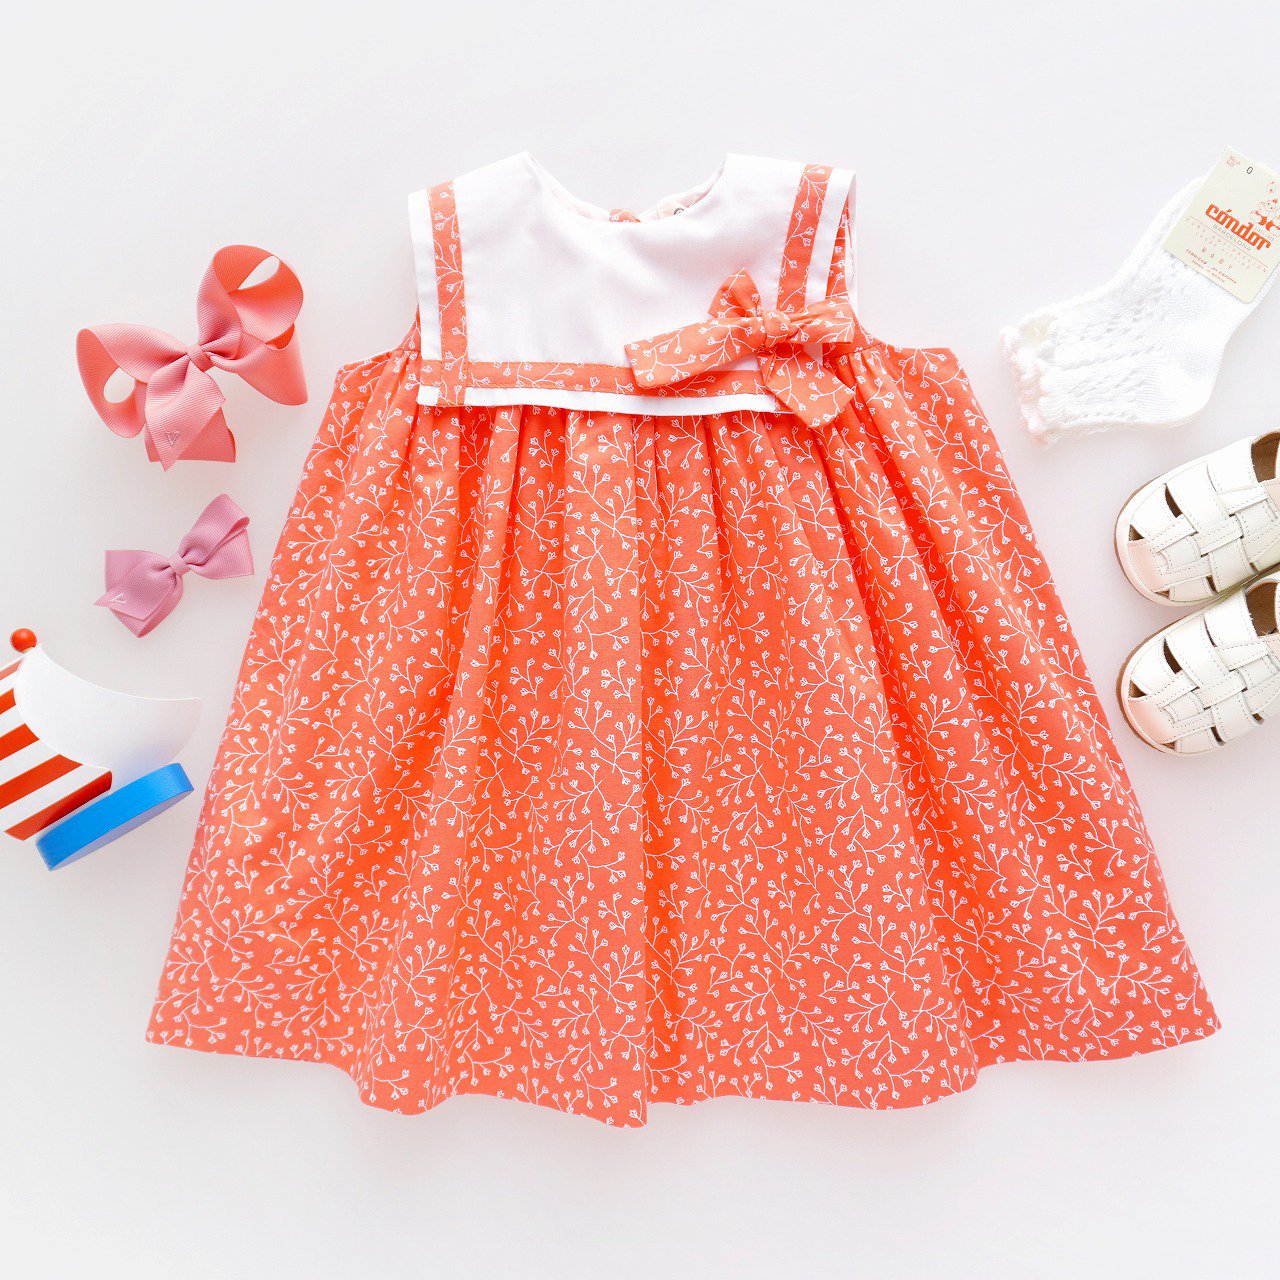 <img class='new_mark_img1' src='https://img.shop-pro.jp/img/new/icons1.gif' style='border:none;display:inline;margin:0px;padding:0px;width:auto;' />Pi & Pa - Coral Sailor dress